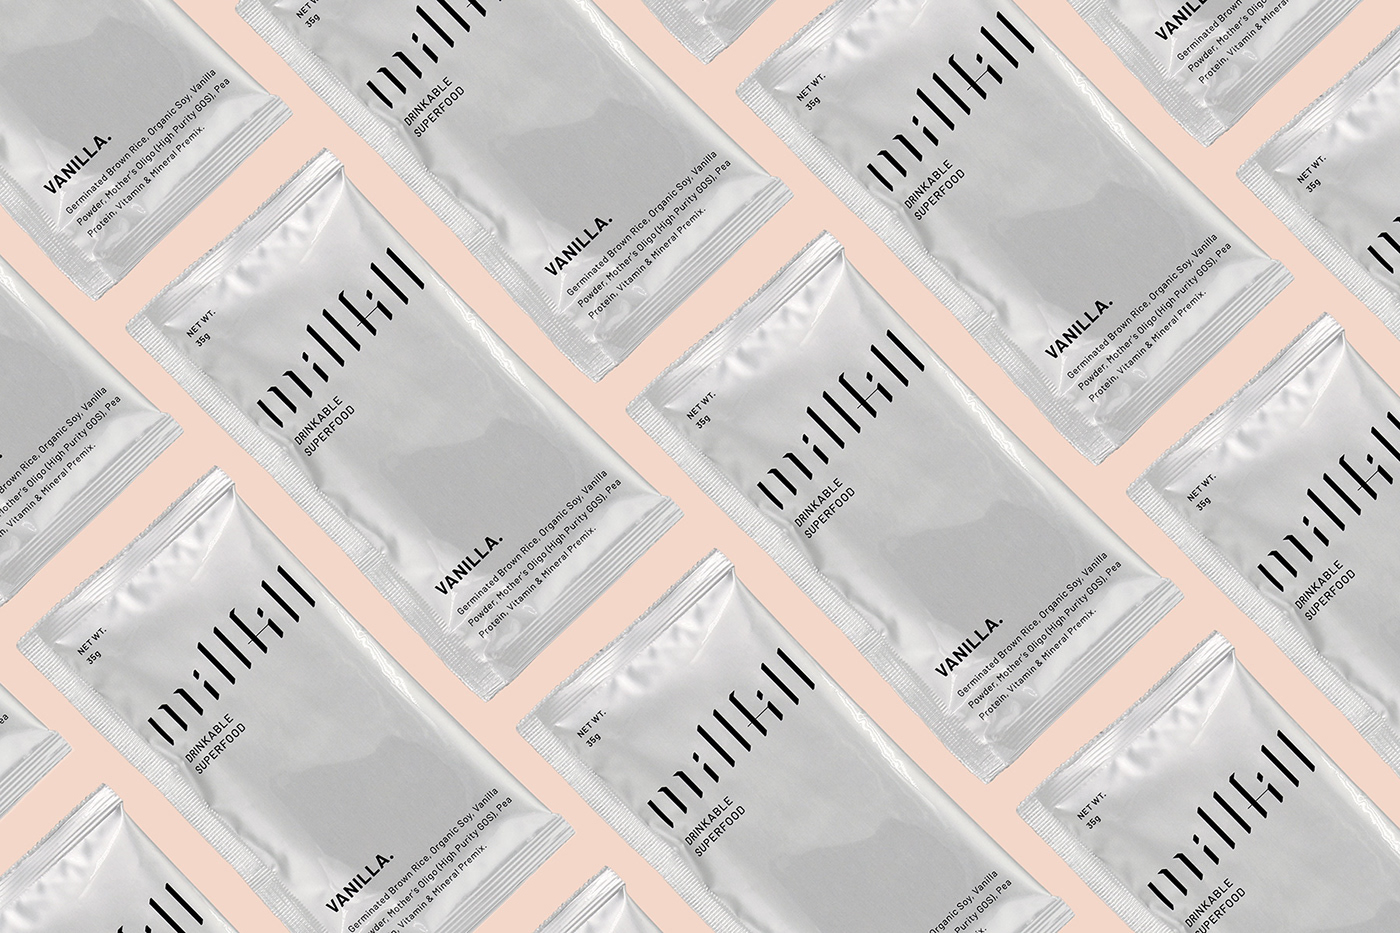 futuristic graphic design  Millfill Packaging superfood visual identity